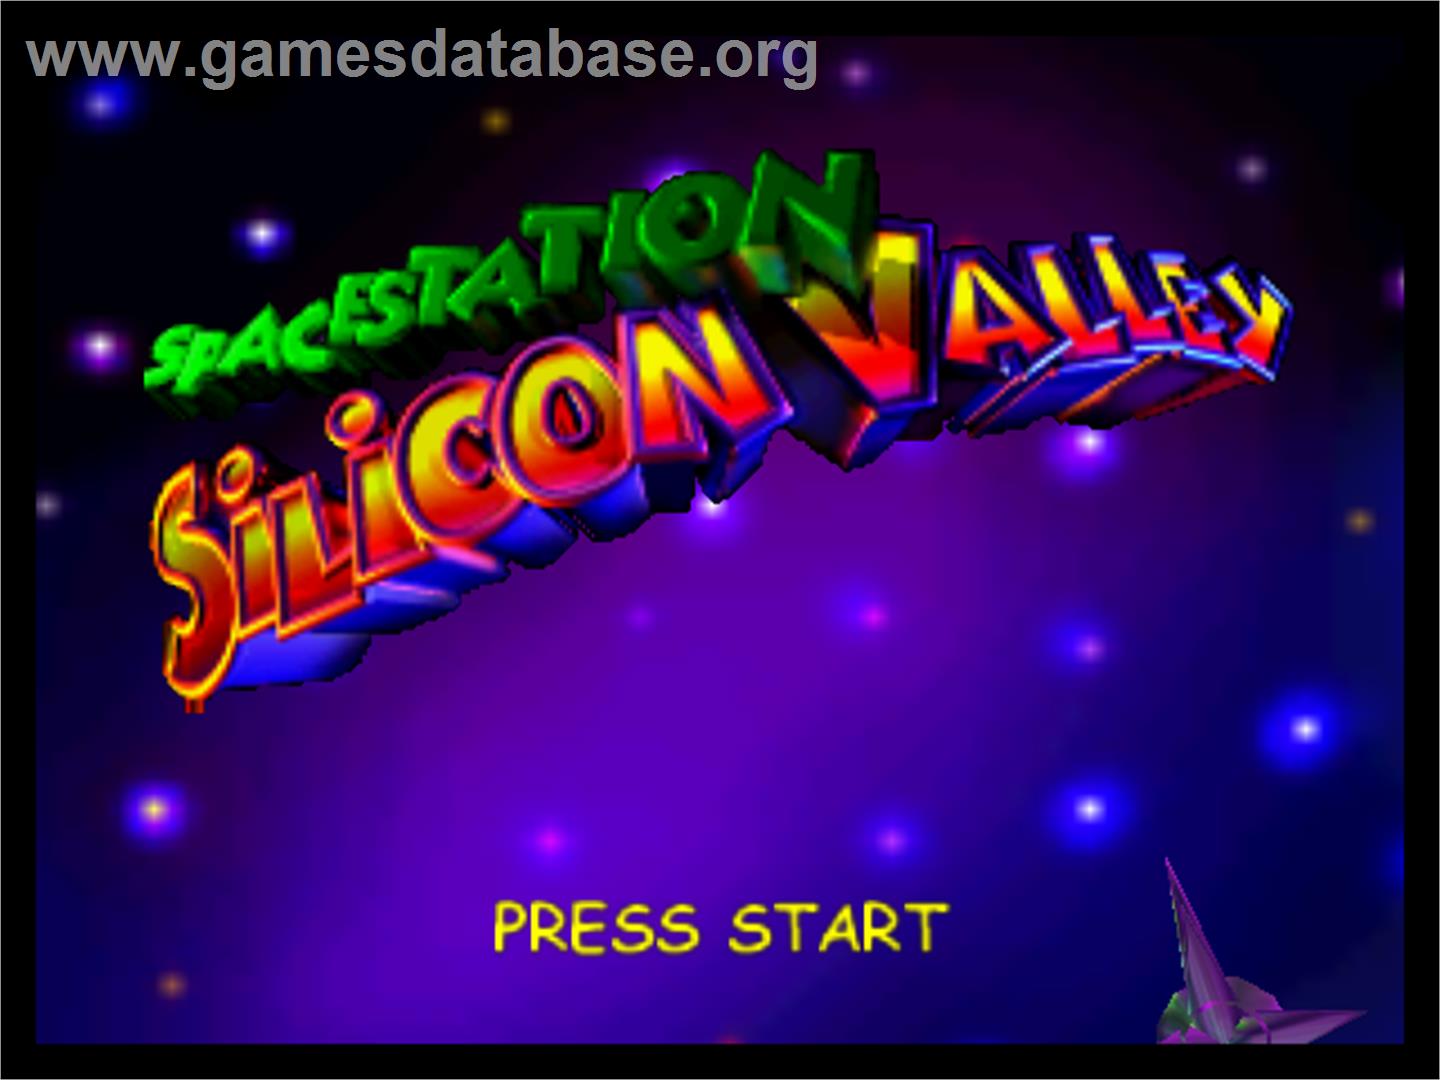 Space Station Silicon Valley - Nintendo N64 - Artwork - Title Screen